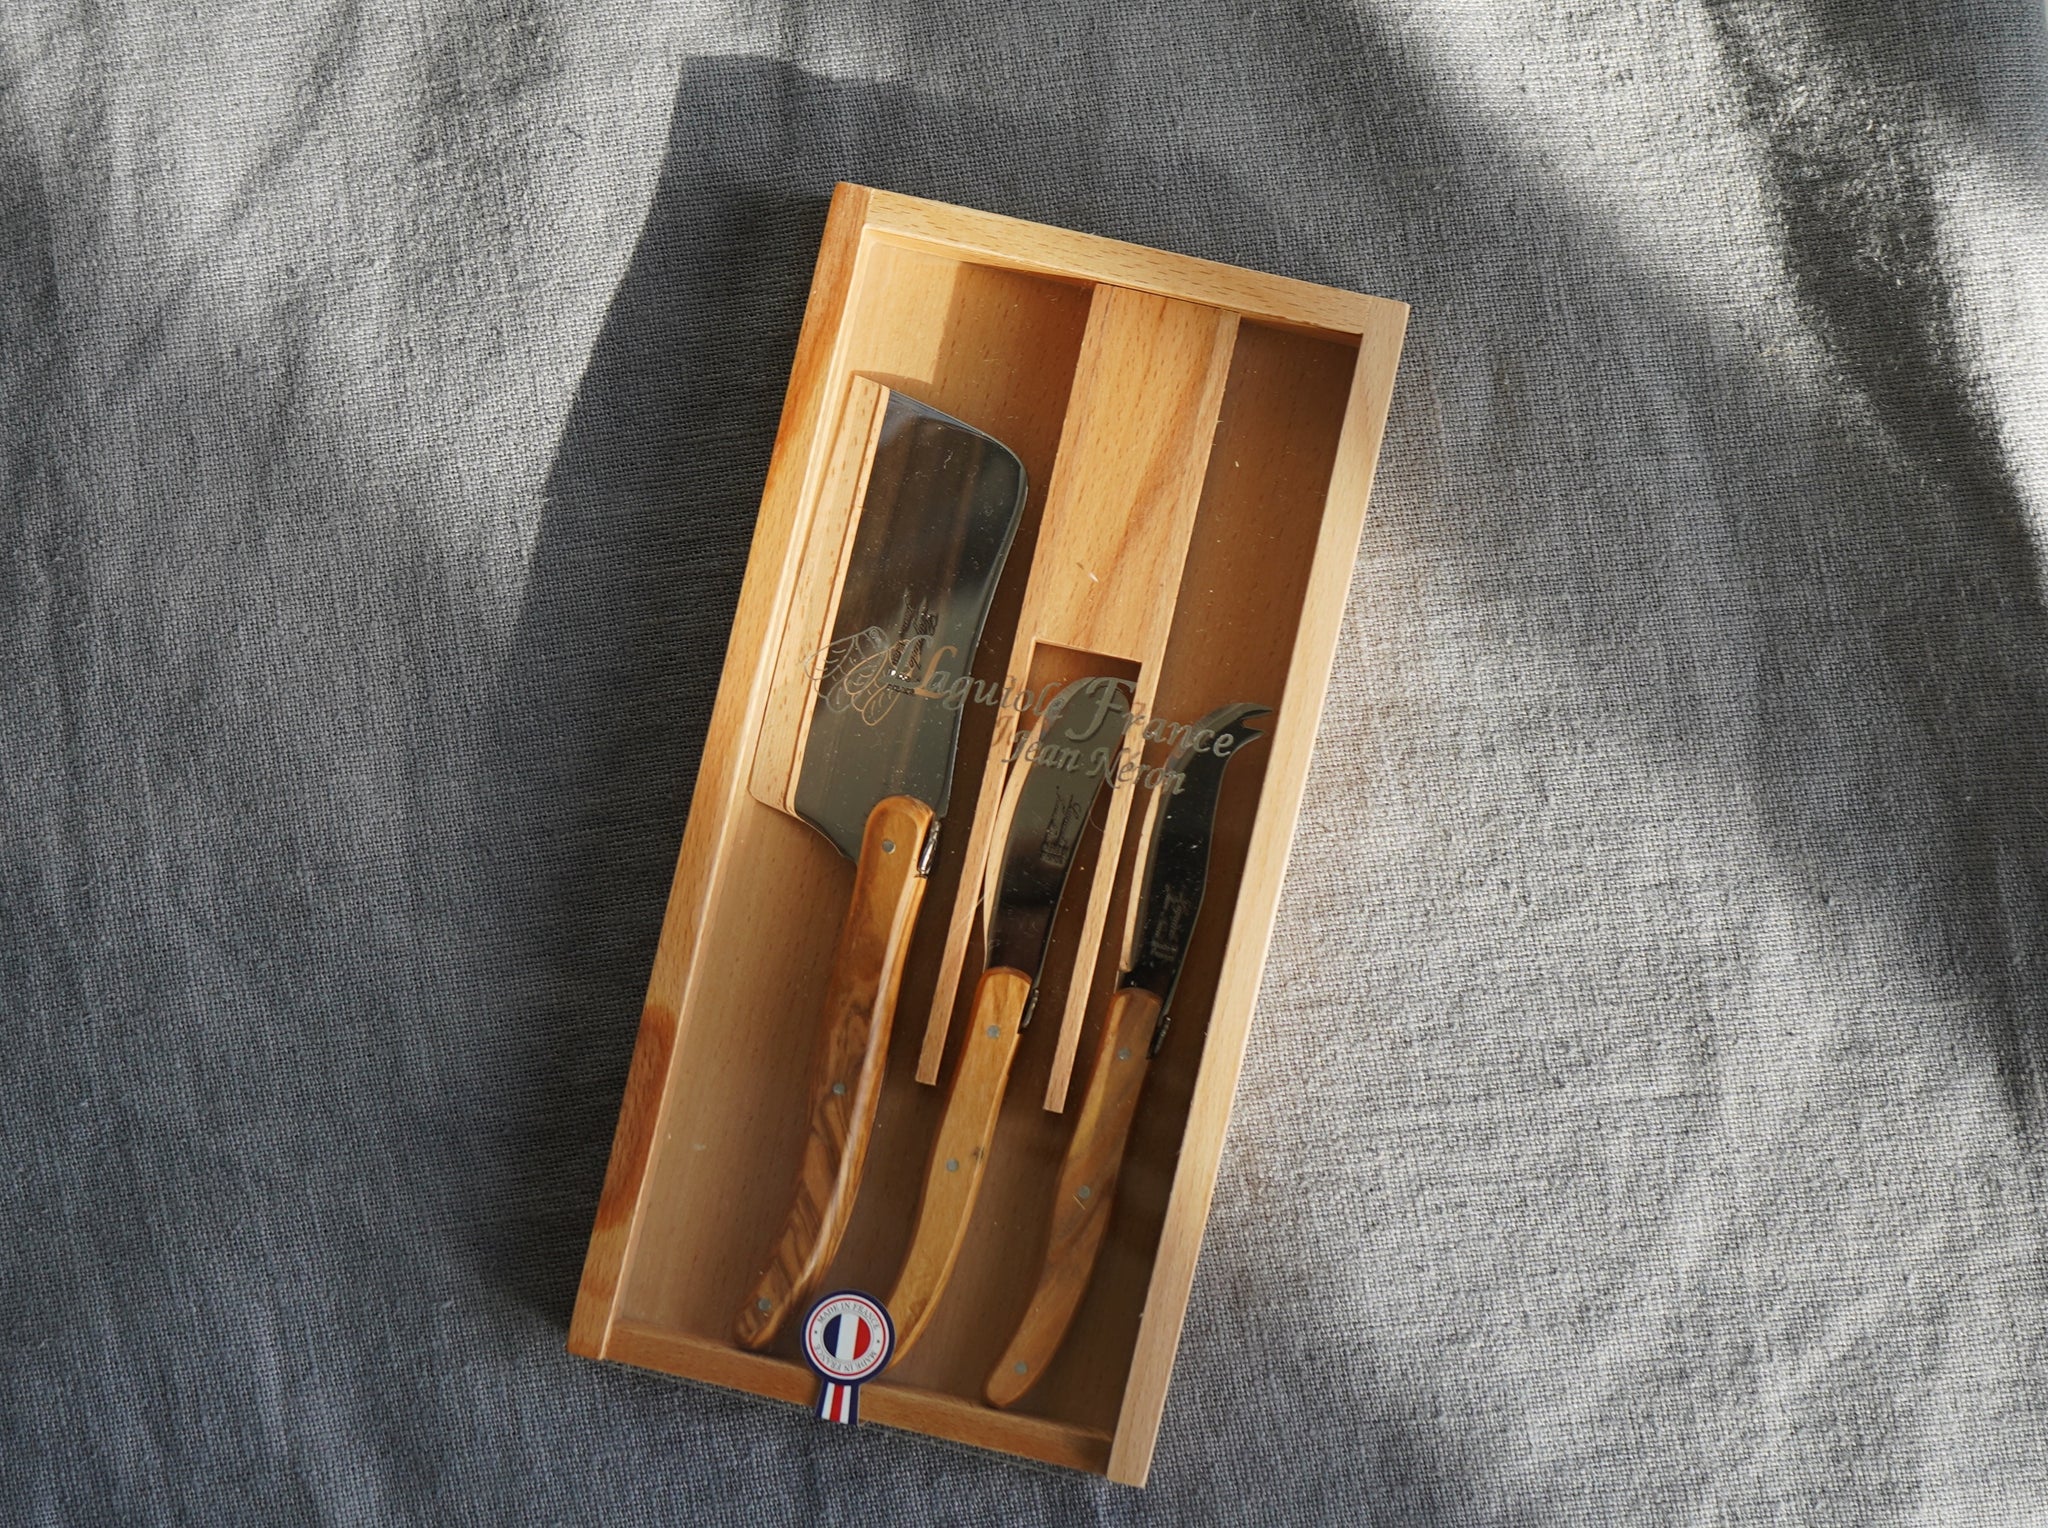 Large olive wood cheese set from Laguiole